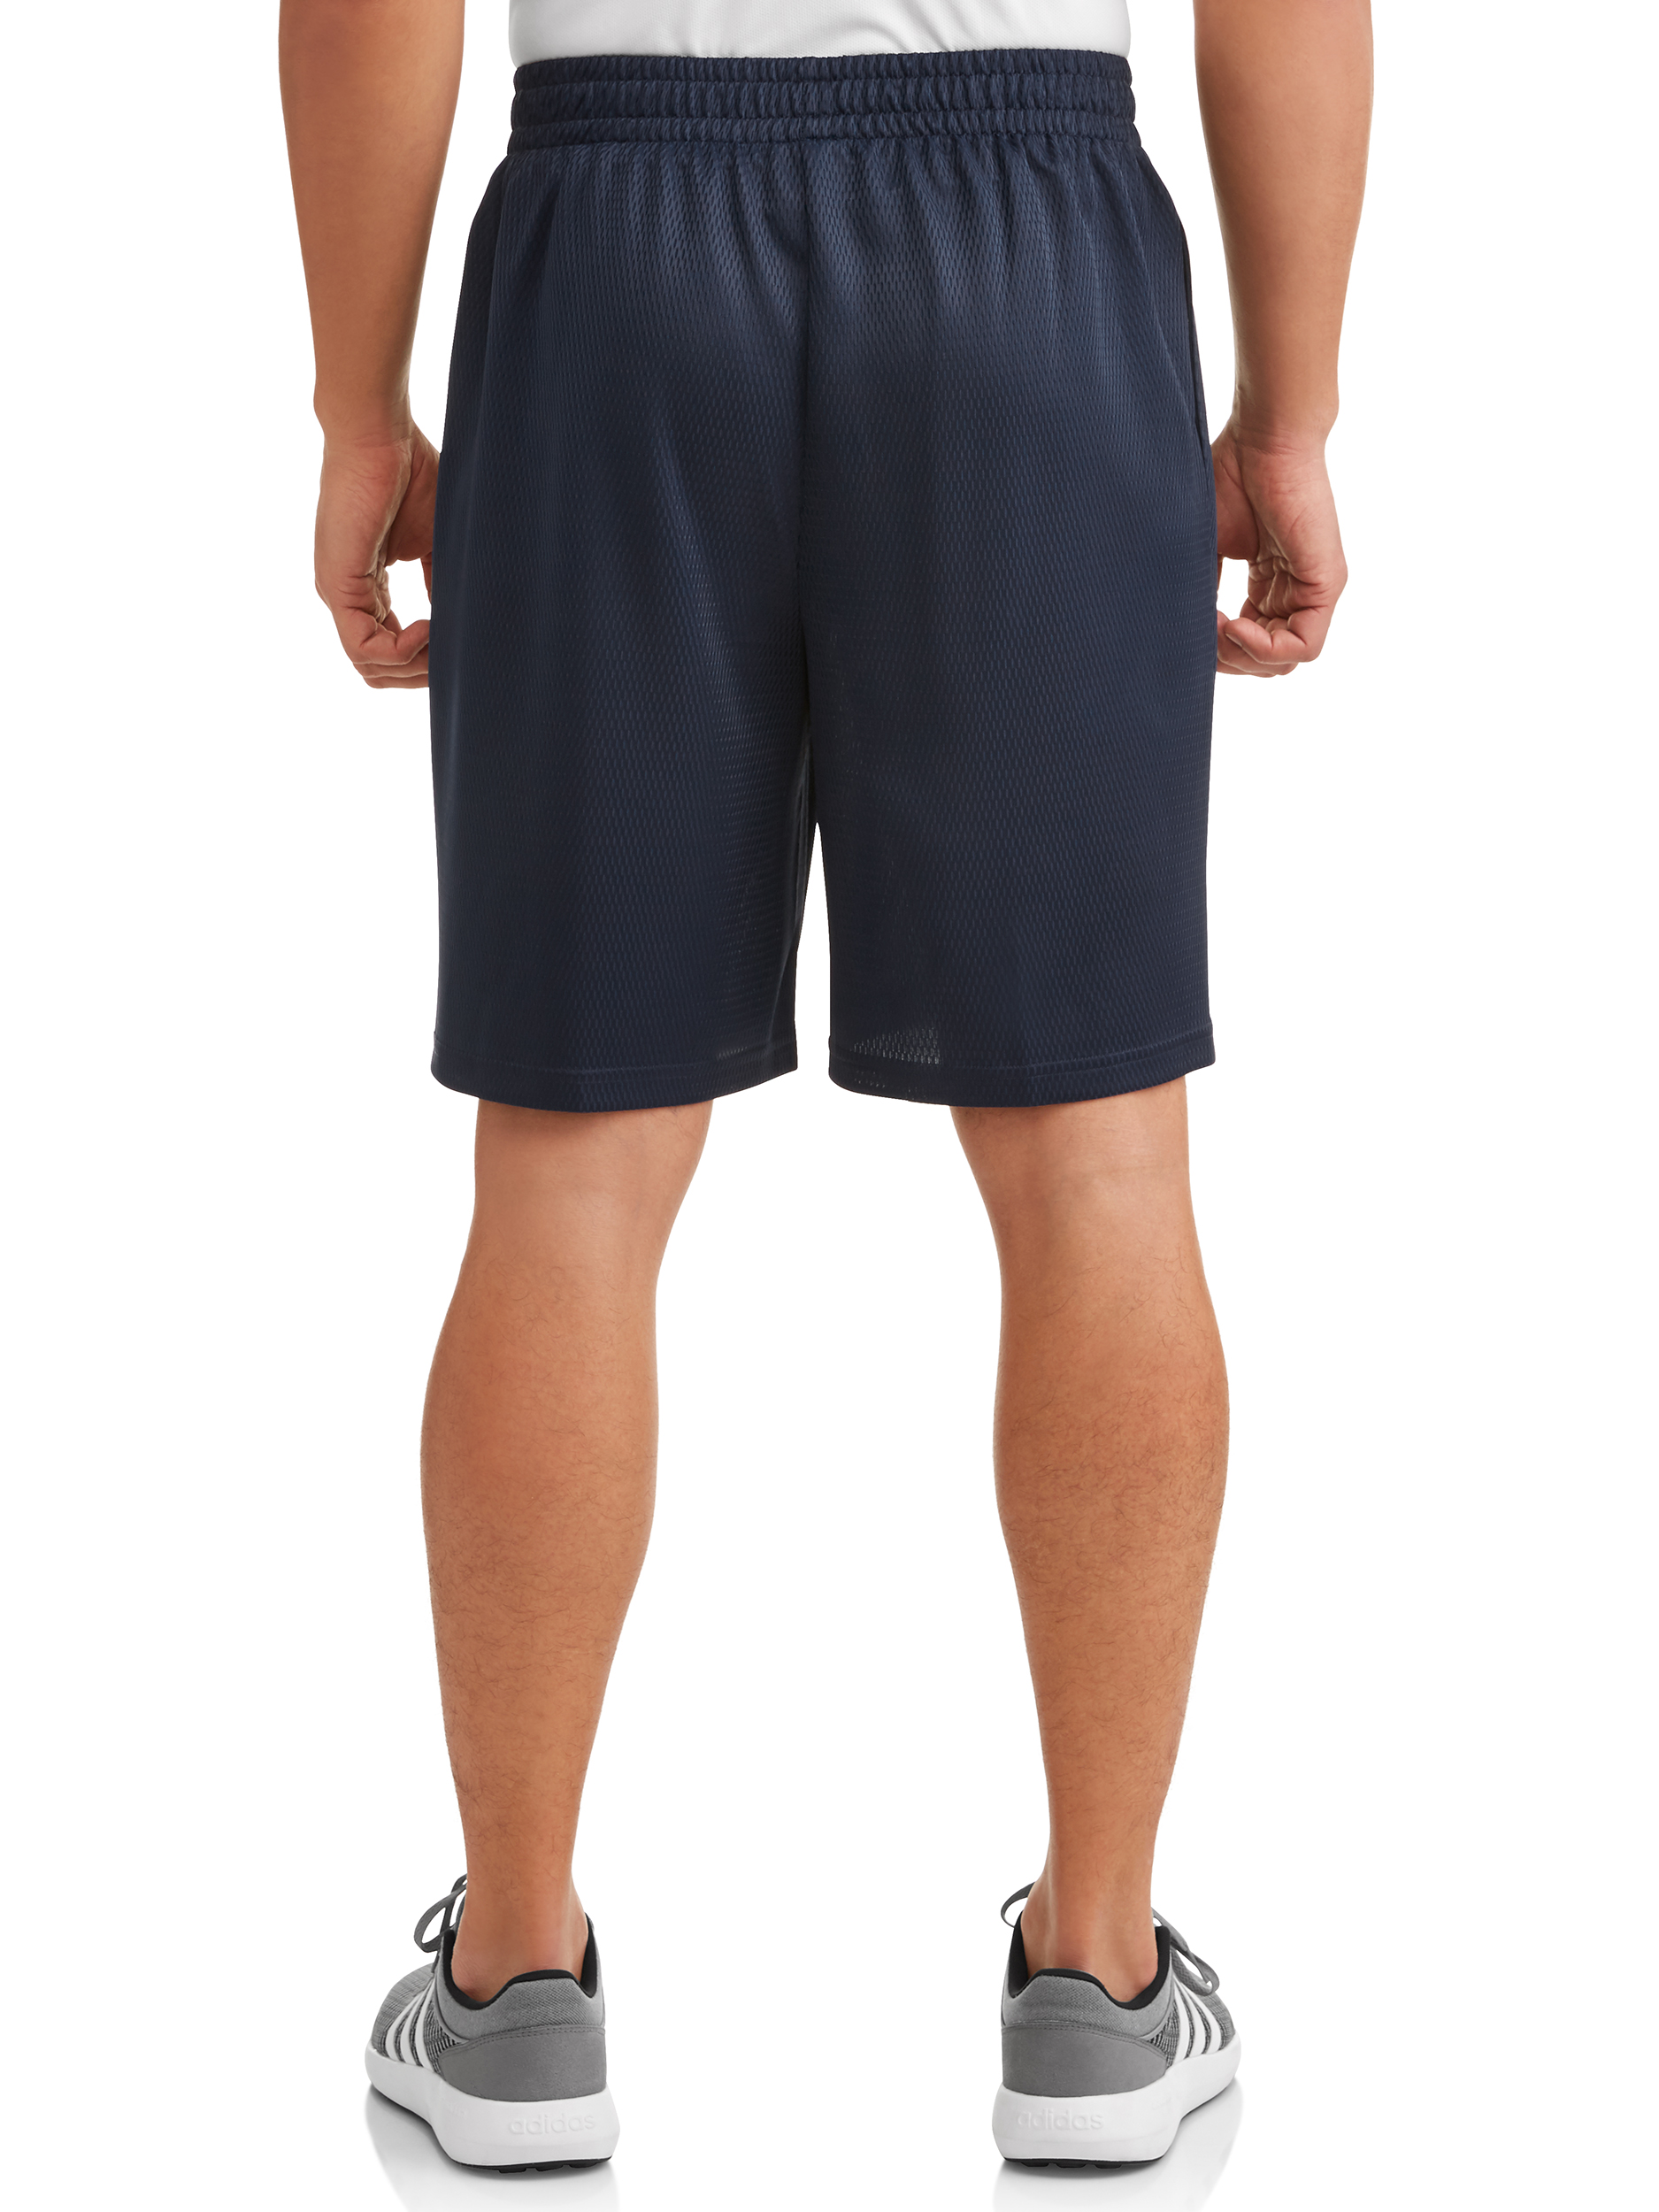 Athletic Works Men's and Big Men's 9" Dazzle Short, Up to 5XL - image 2 of 4